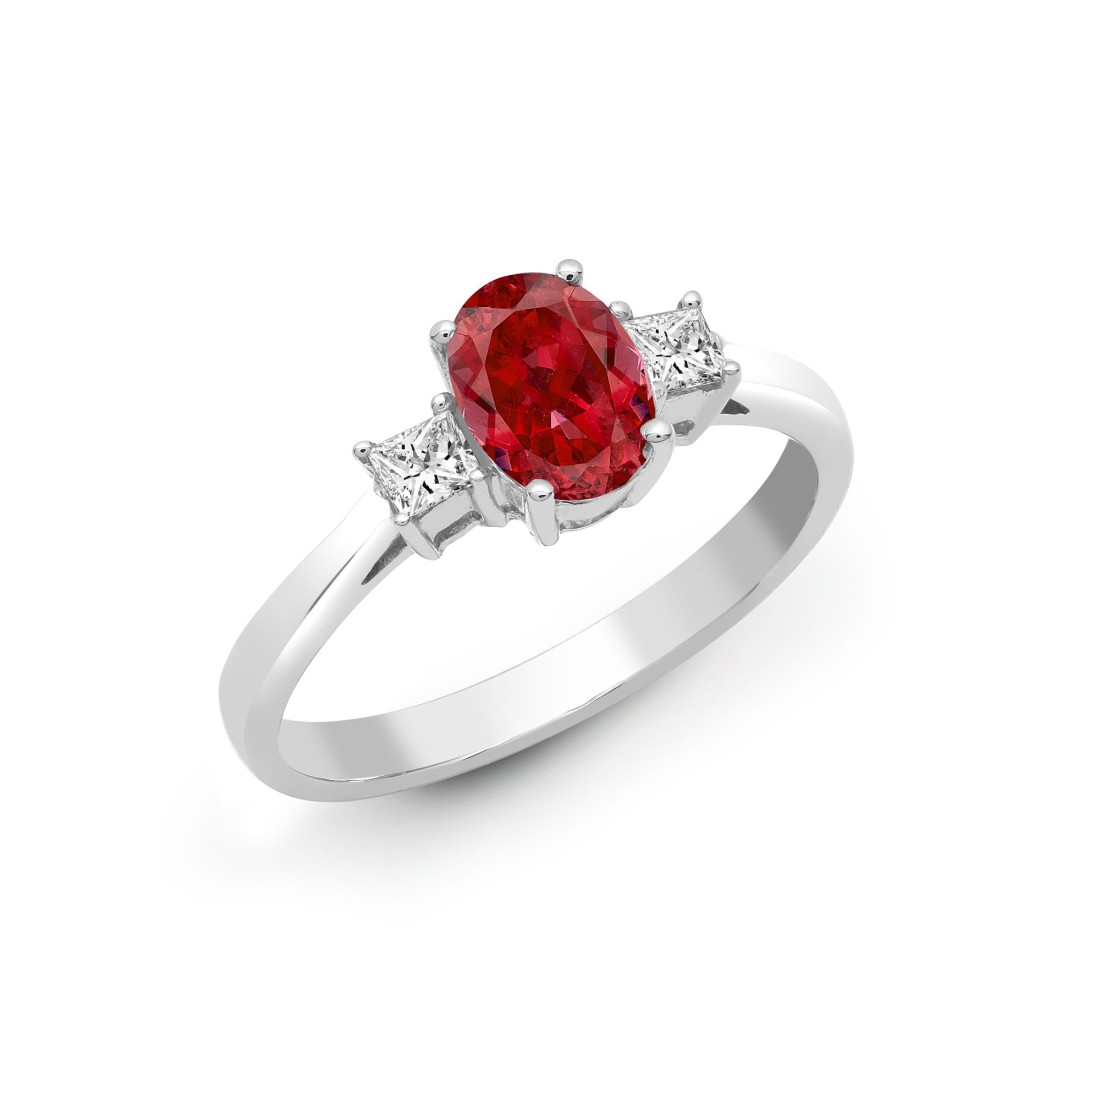 1.25 Carat Oval Cut Ruby In The Center and Princess Cut Stone In The Side